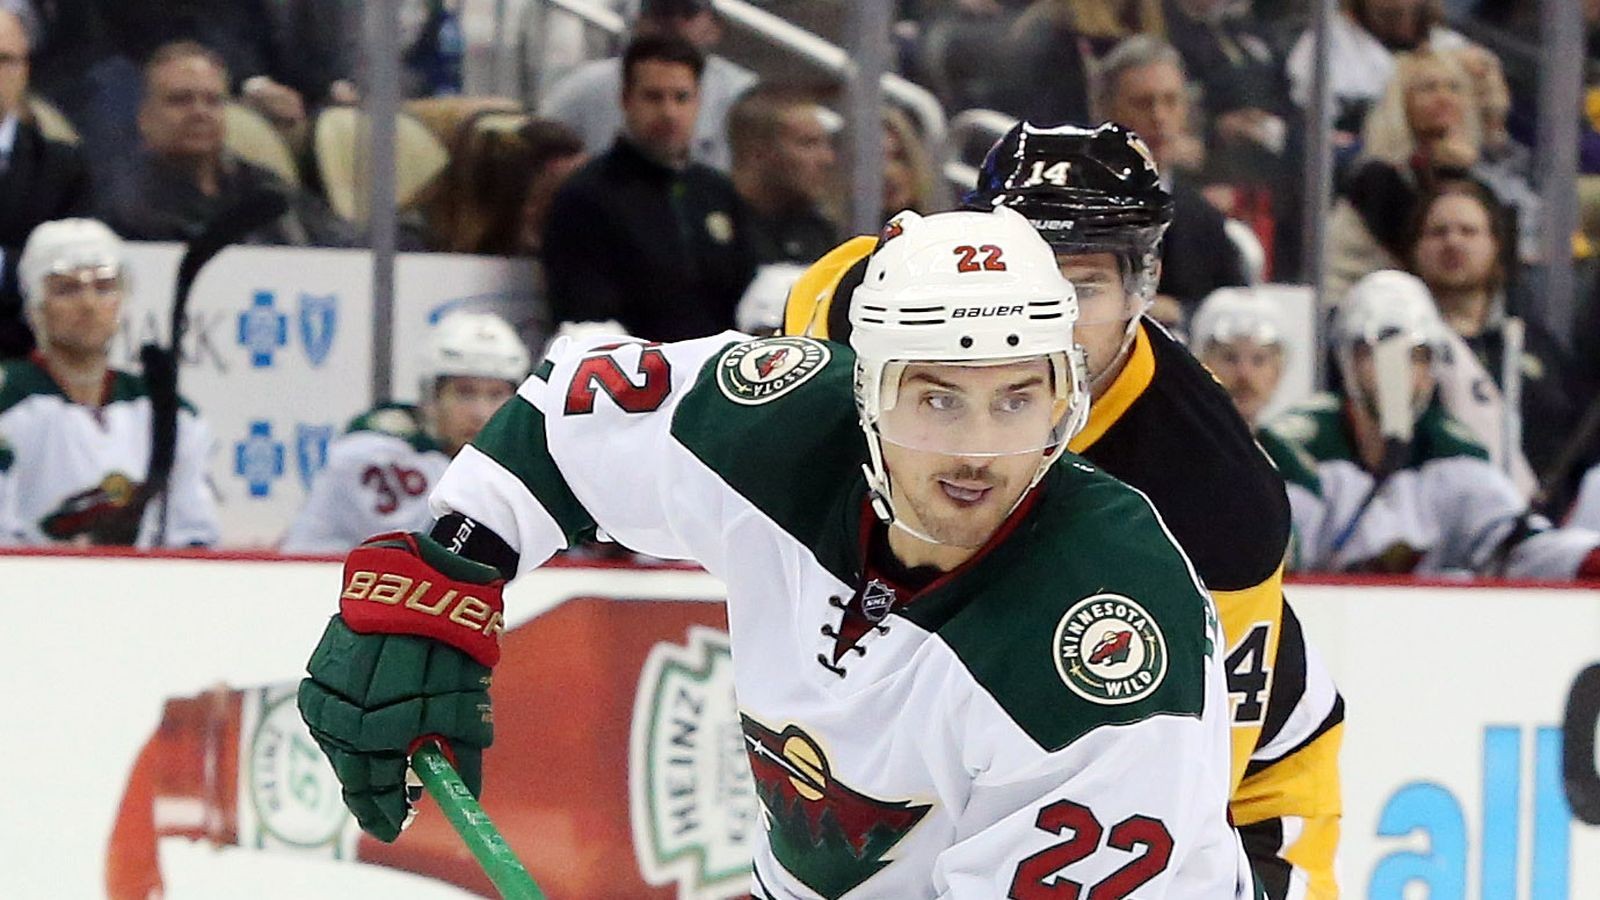 Minnesota Wild @ Pittsburgh Penguins: Game Preview, Start Time, TV Schedule